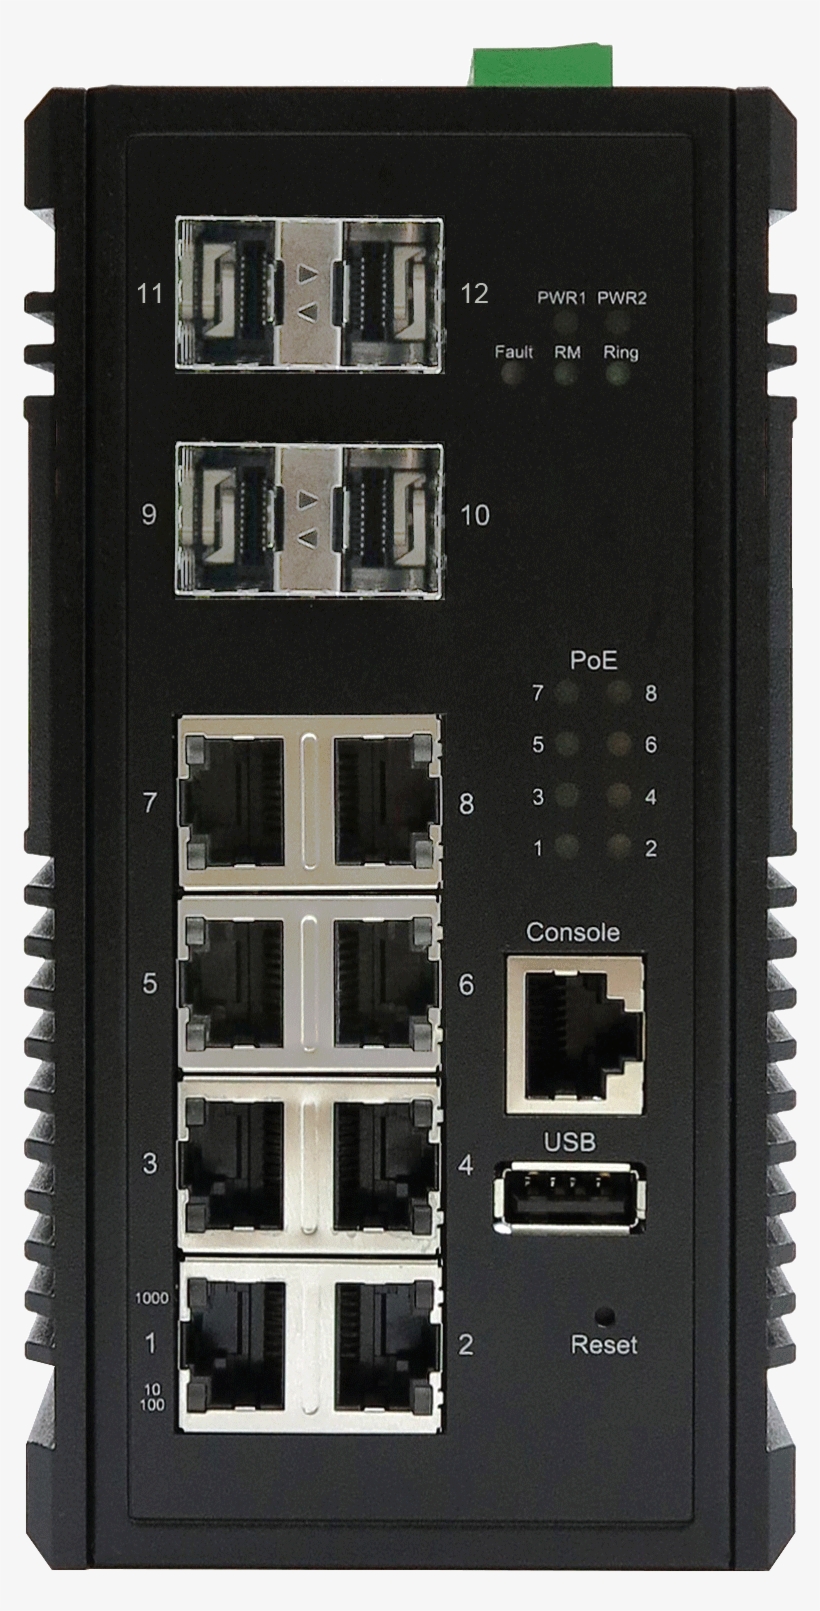 Mt-0804g - Network Switch, transparent png #5210507